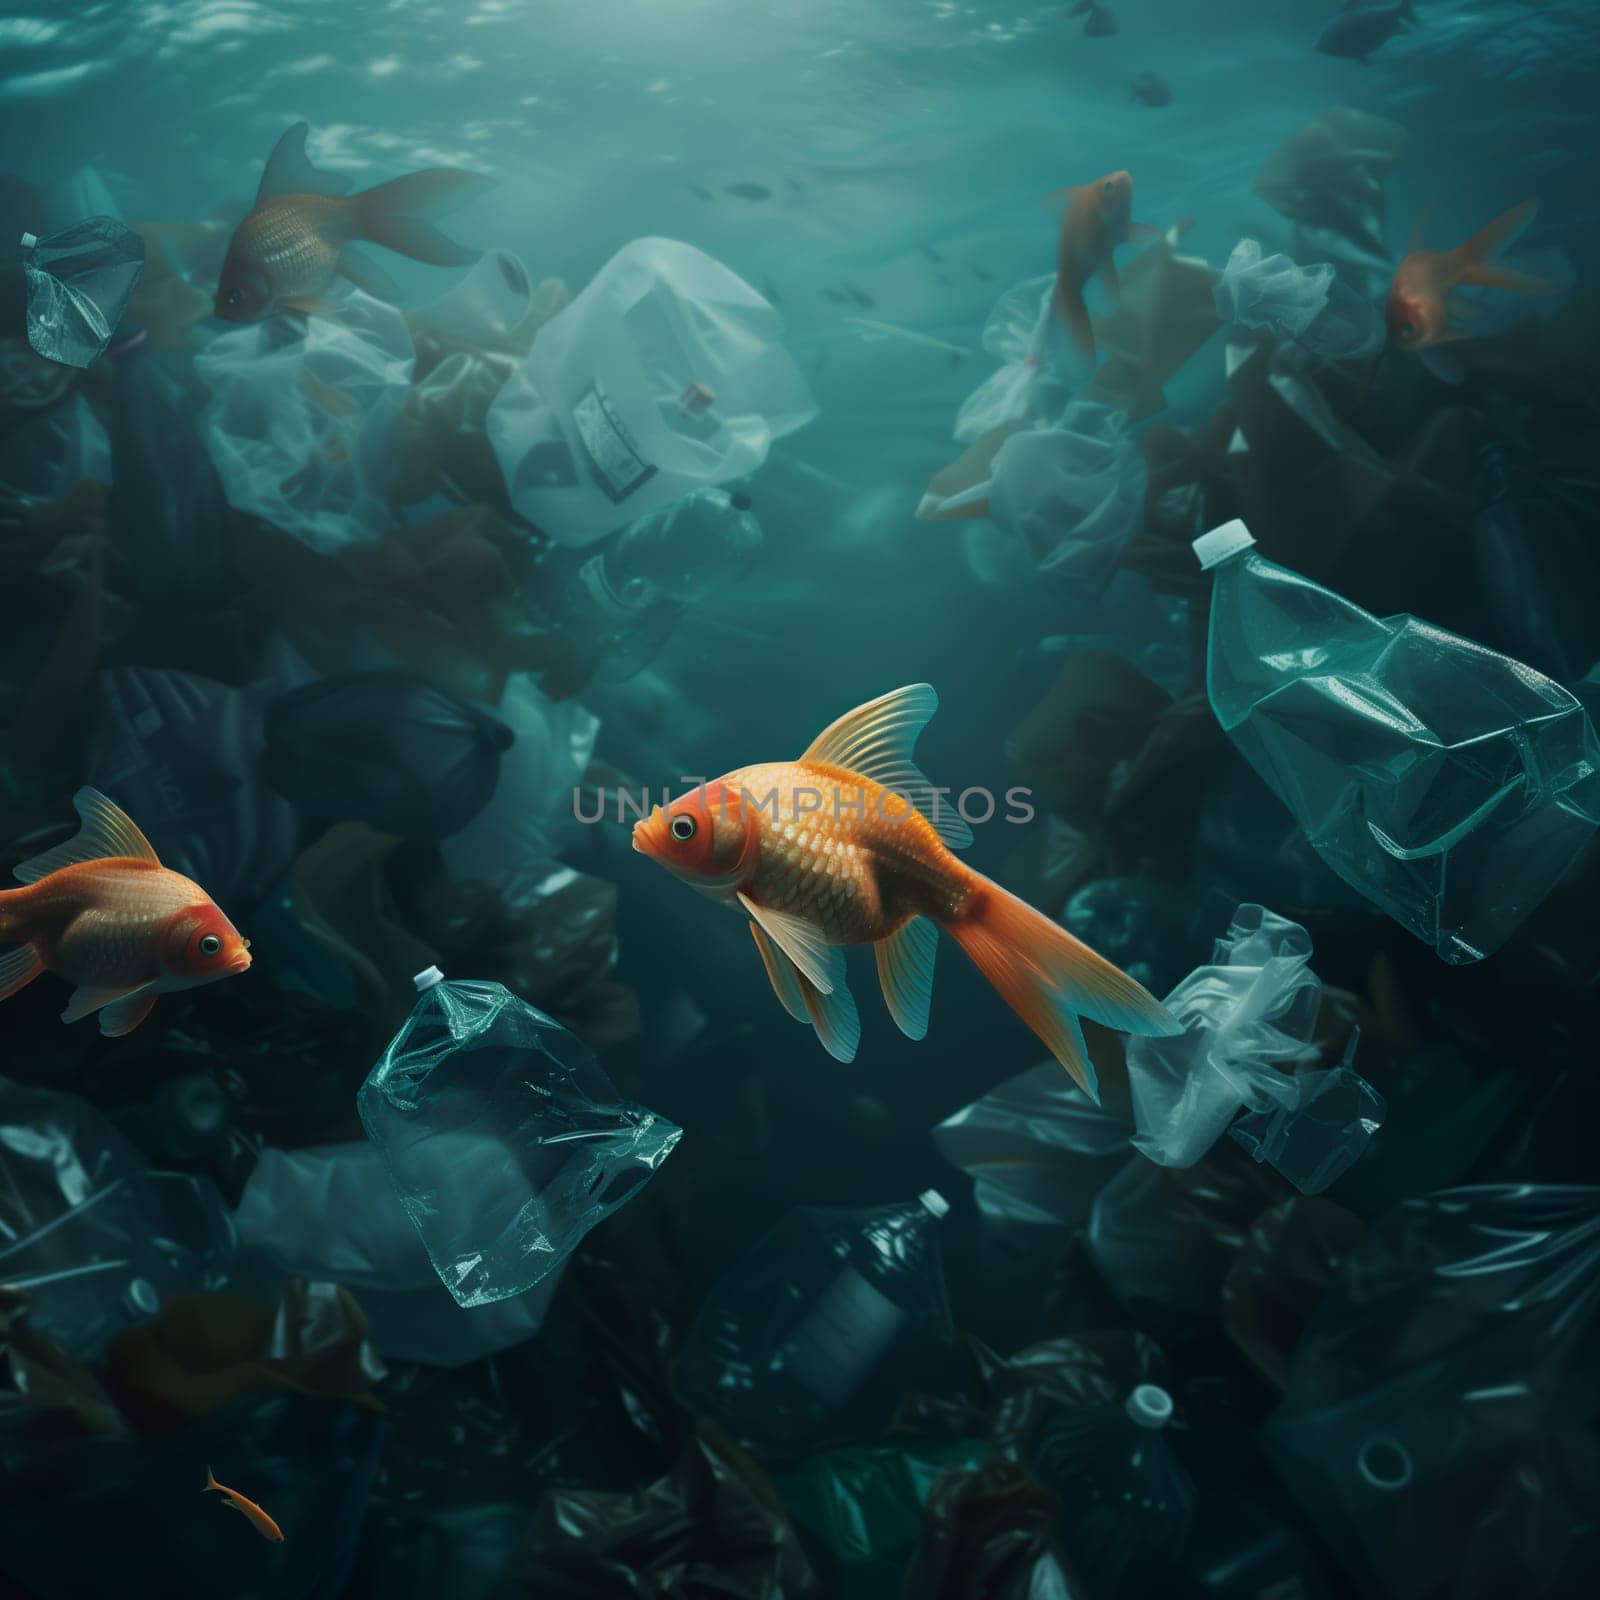 Two goldfish swim in the dark oceans with a pile of plastic trash, side view close-up.